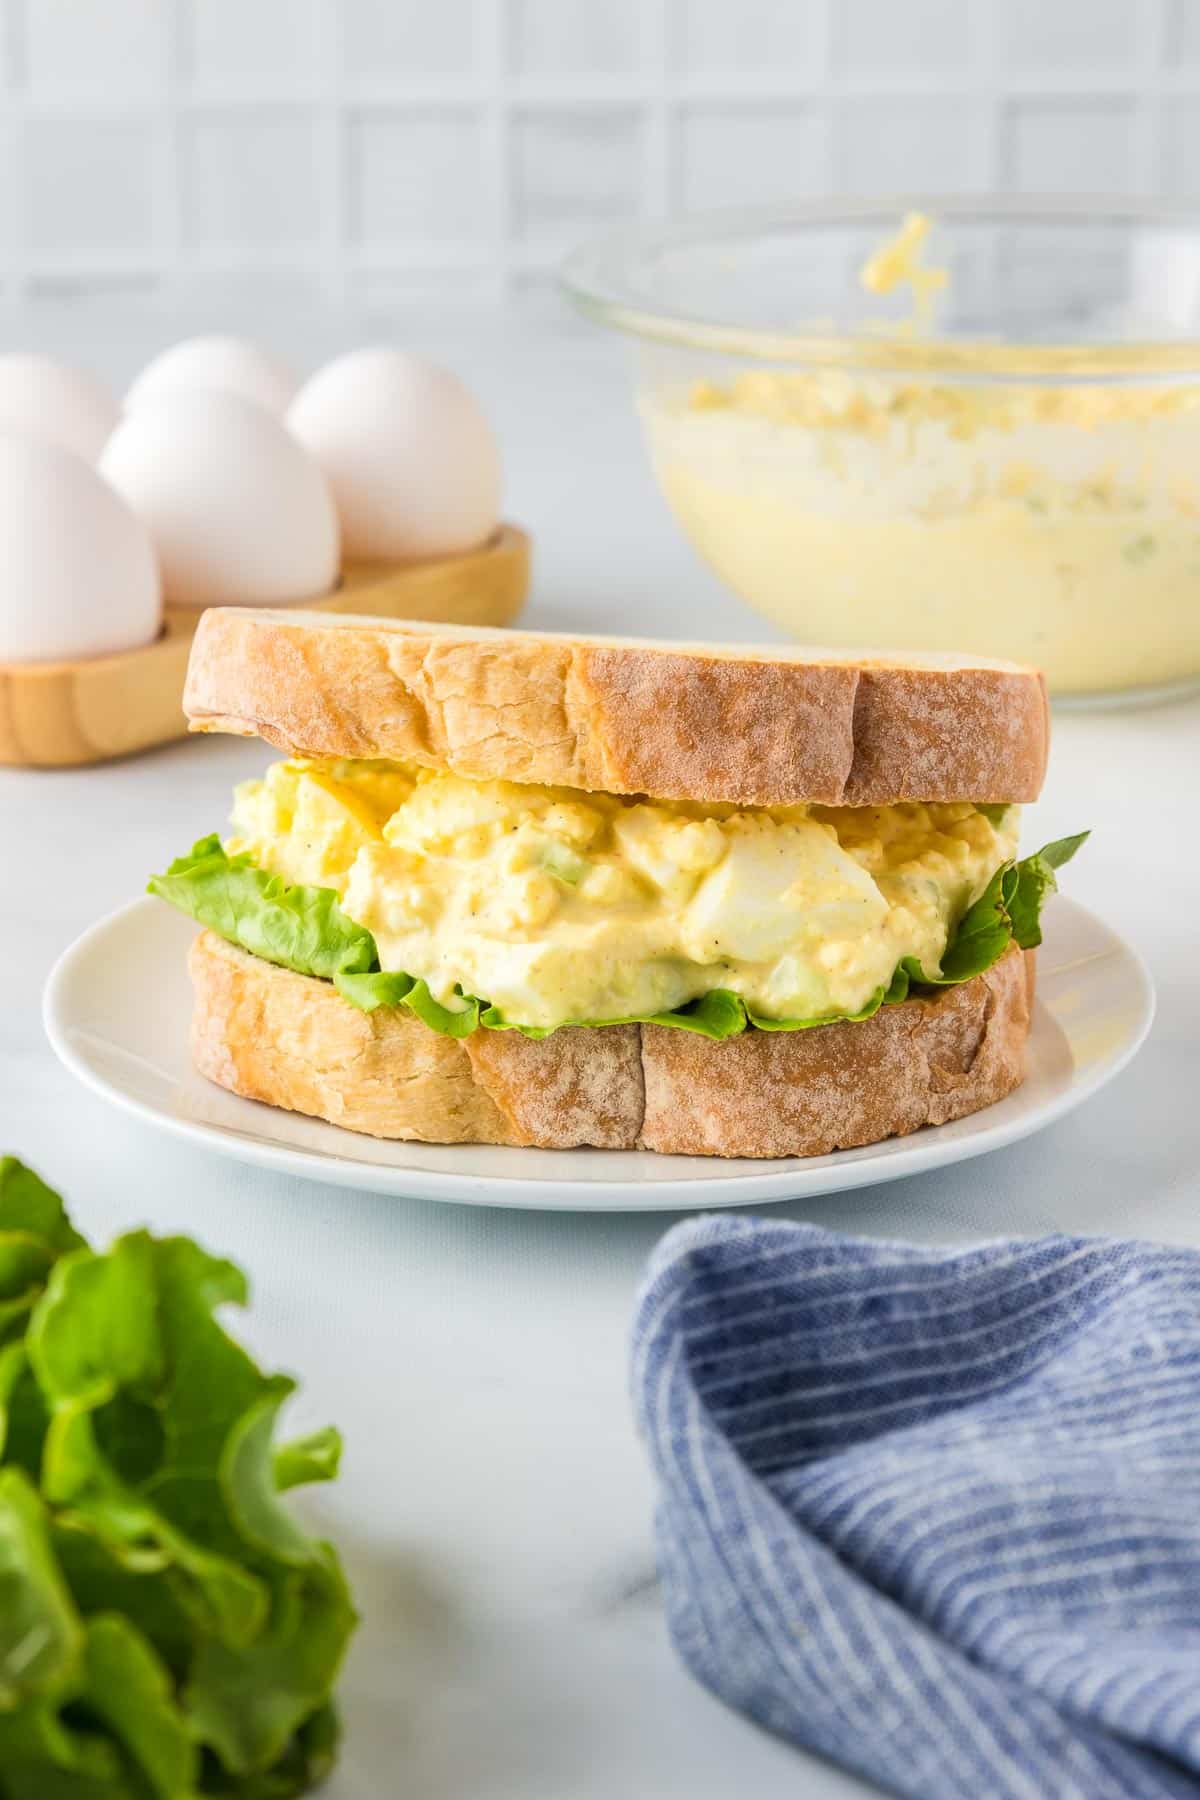 A plate holds an egg salad sandwich with lettuce on a plate with more ingredients in the background on the counter.